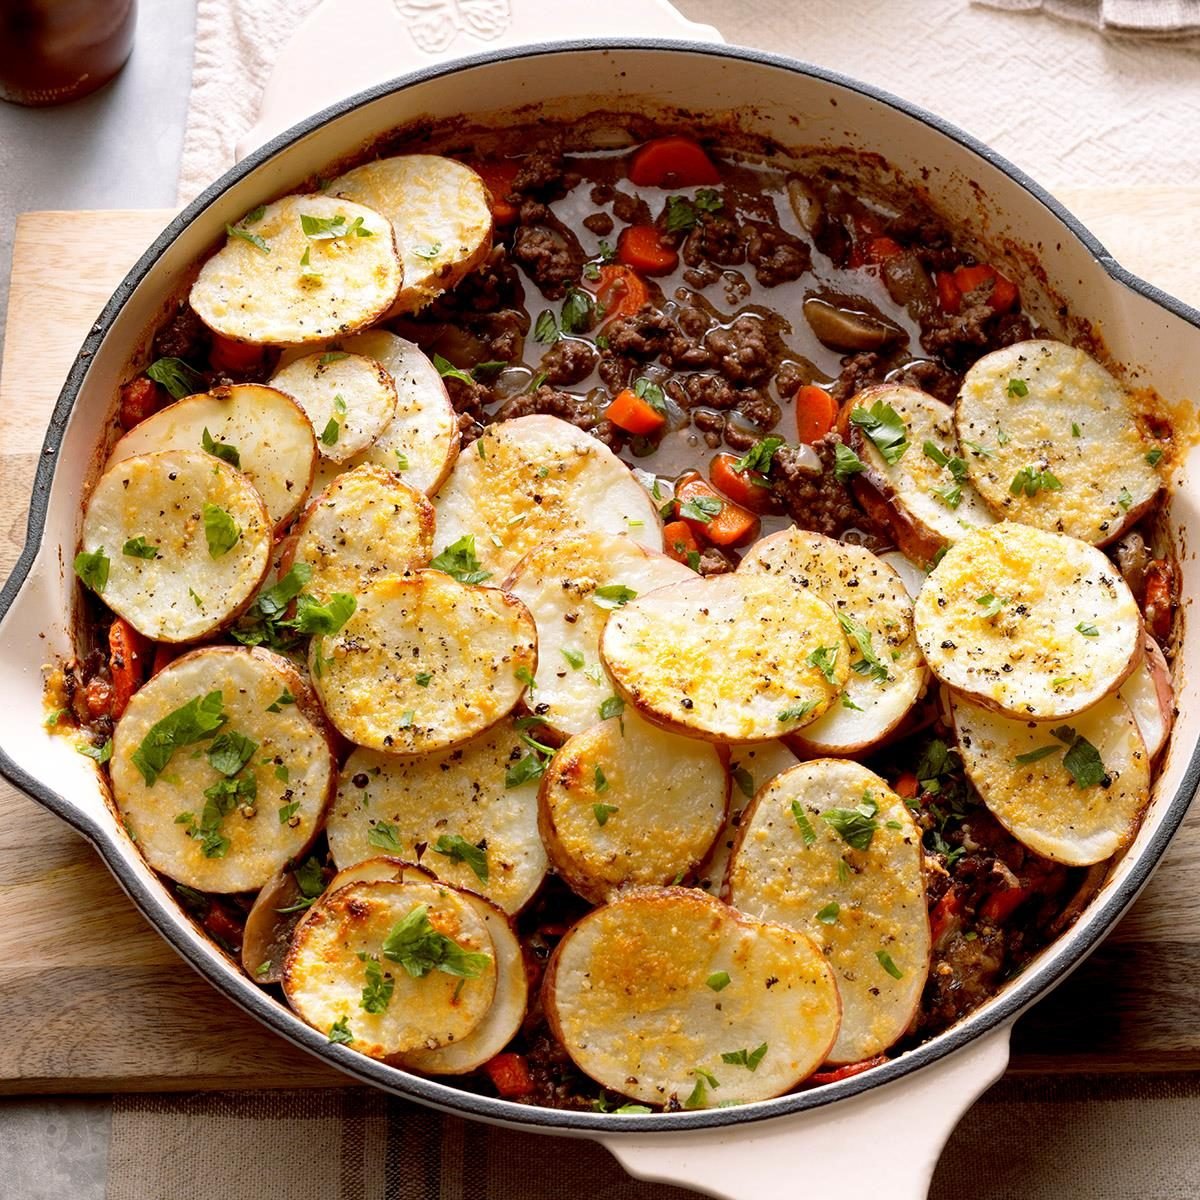 Potato Topped Ground Beef Skillet Exps Hck18 191121 B04 014 6b 30